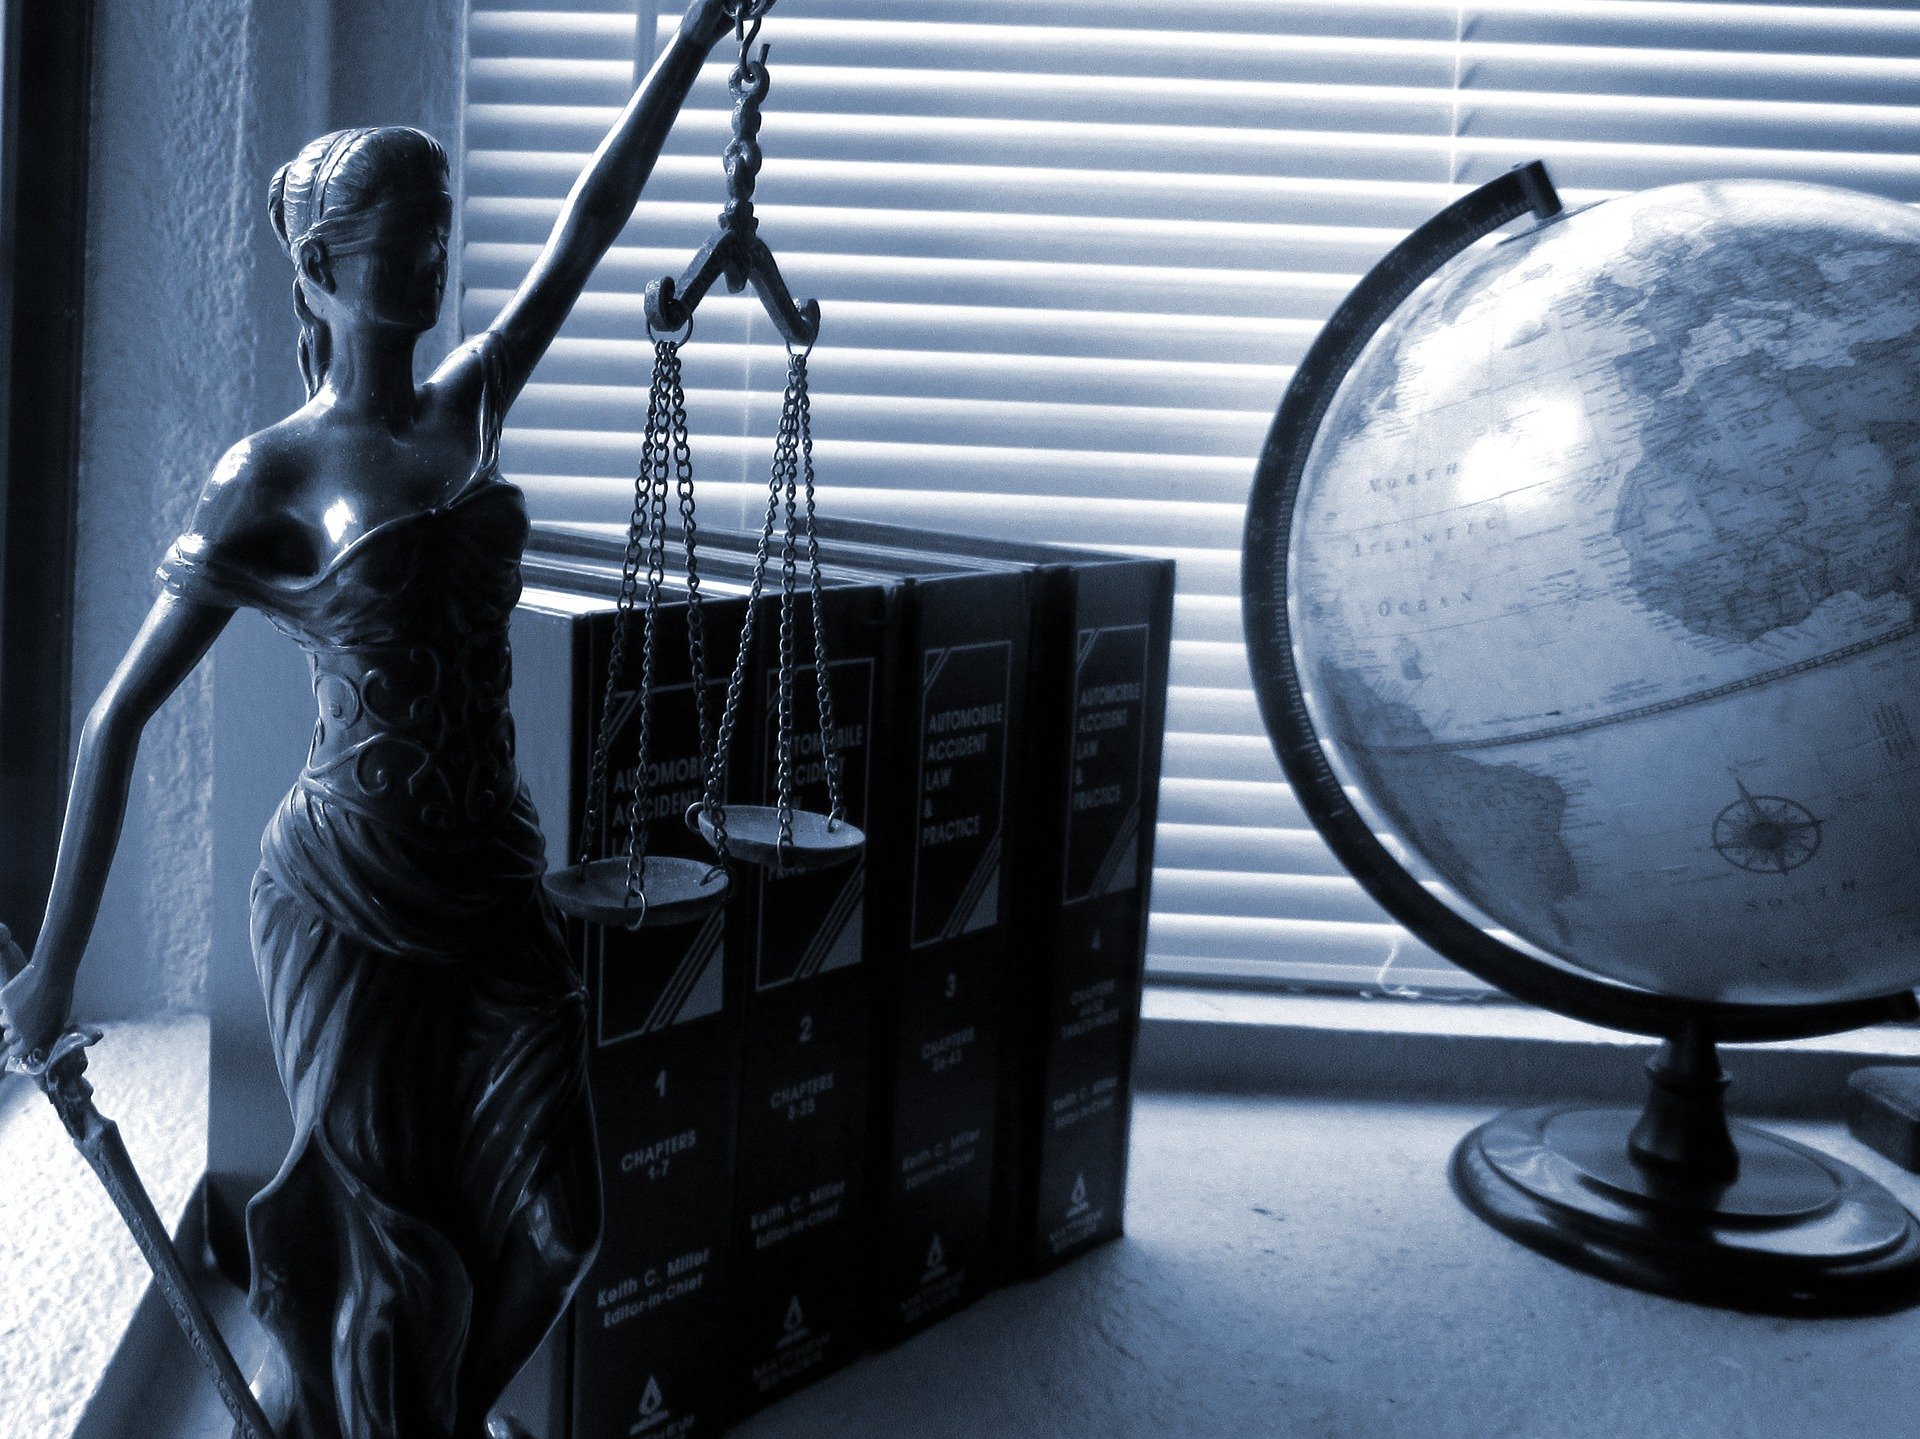 A stock image of a lady justice statue to accompany a guide to employment law in Uruguay